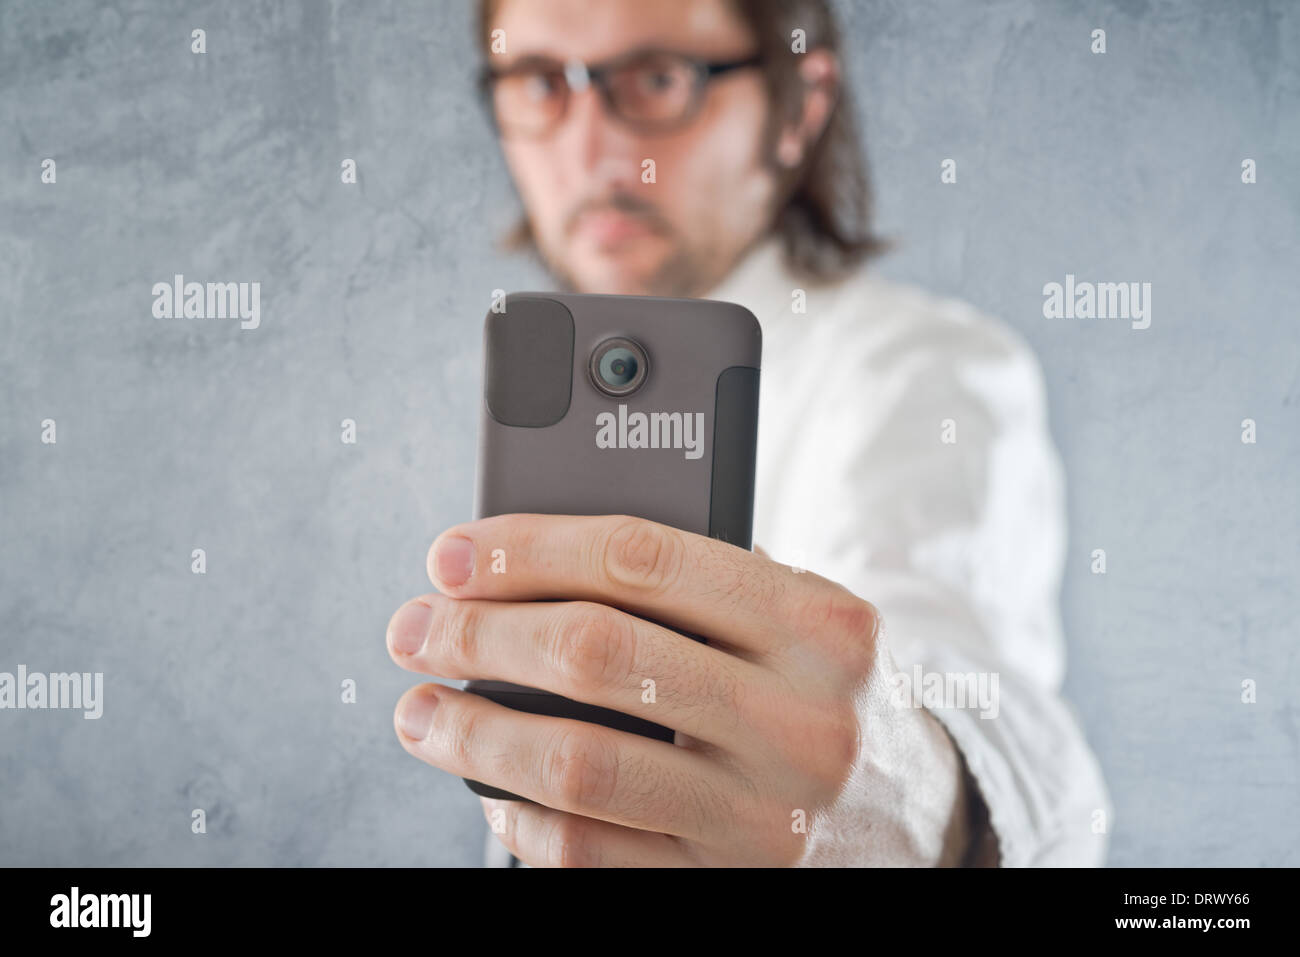 Businessman taking picture with mobile phone, selective focus on device and hand Stock Photo